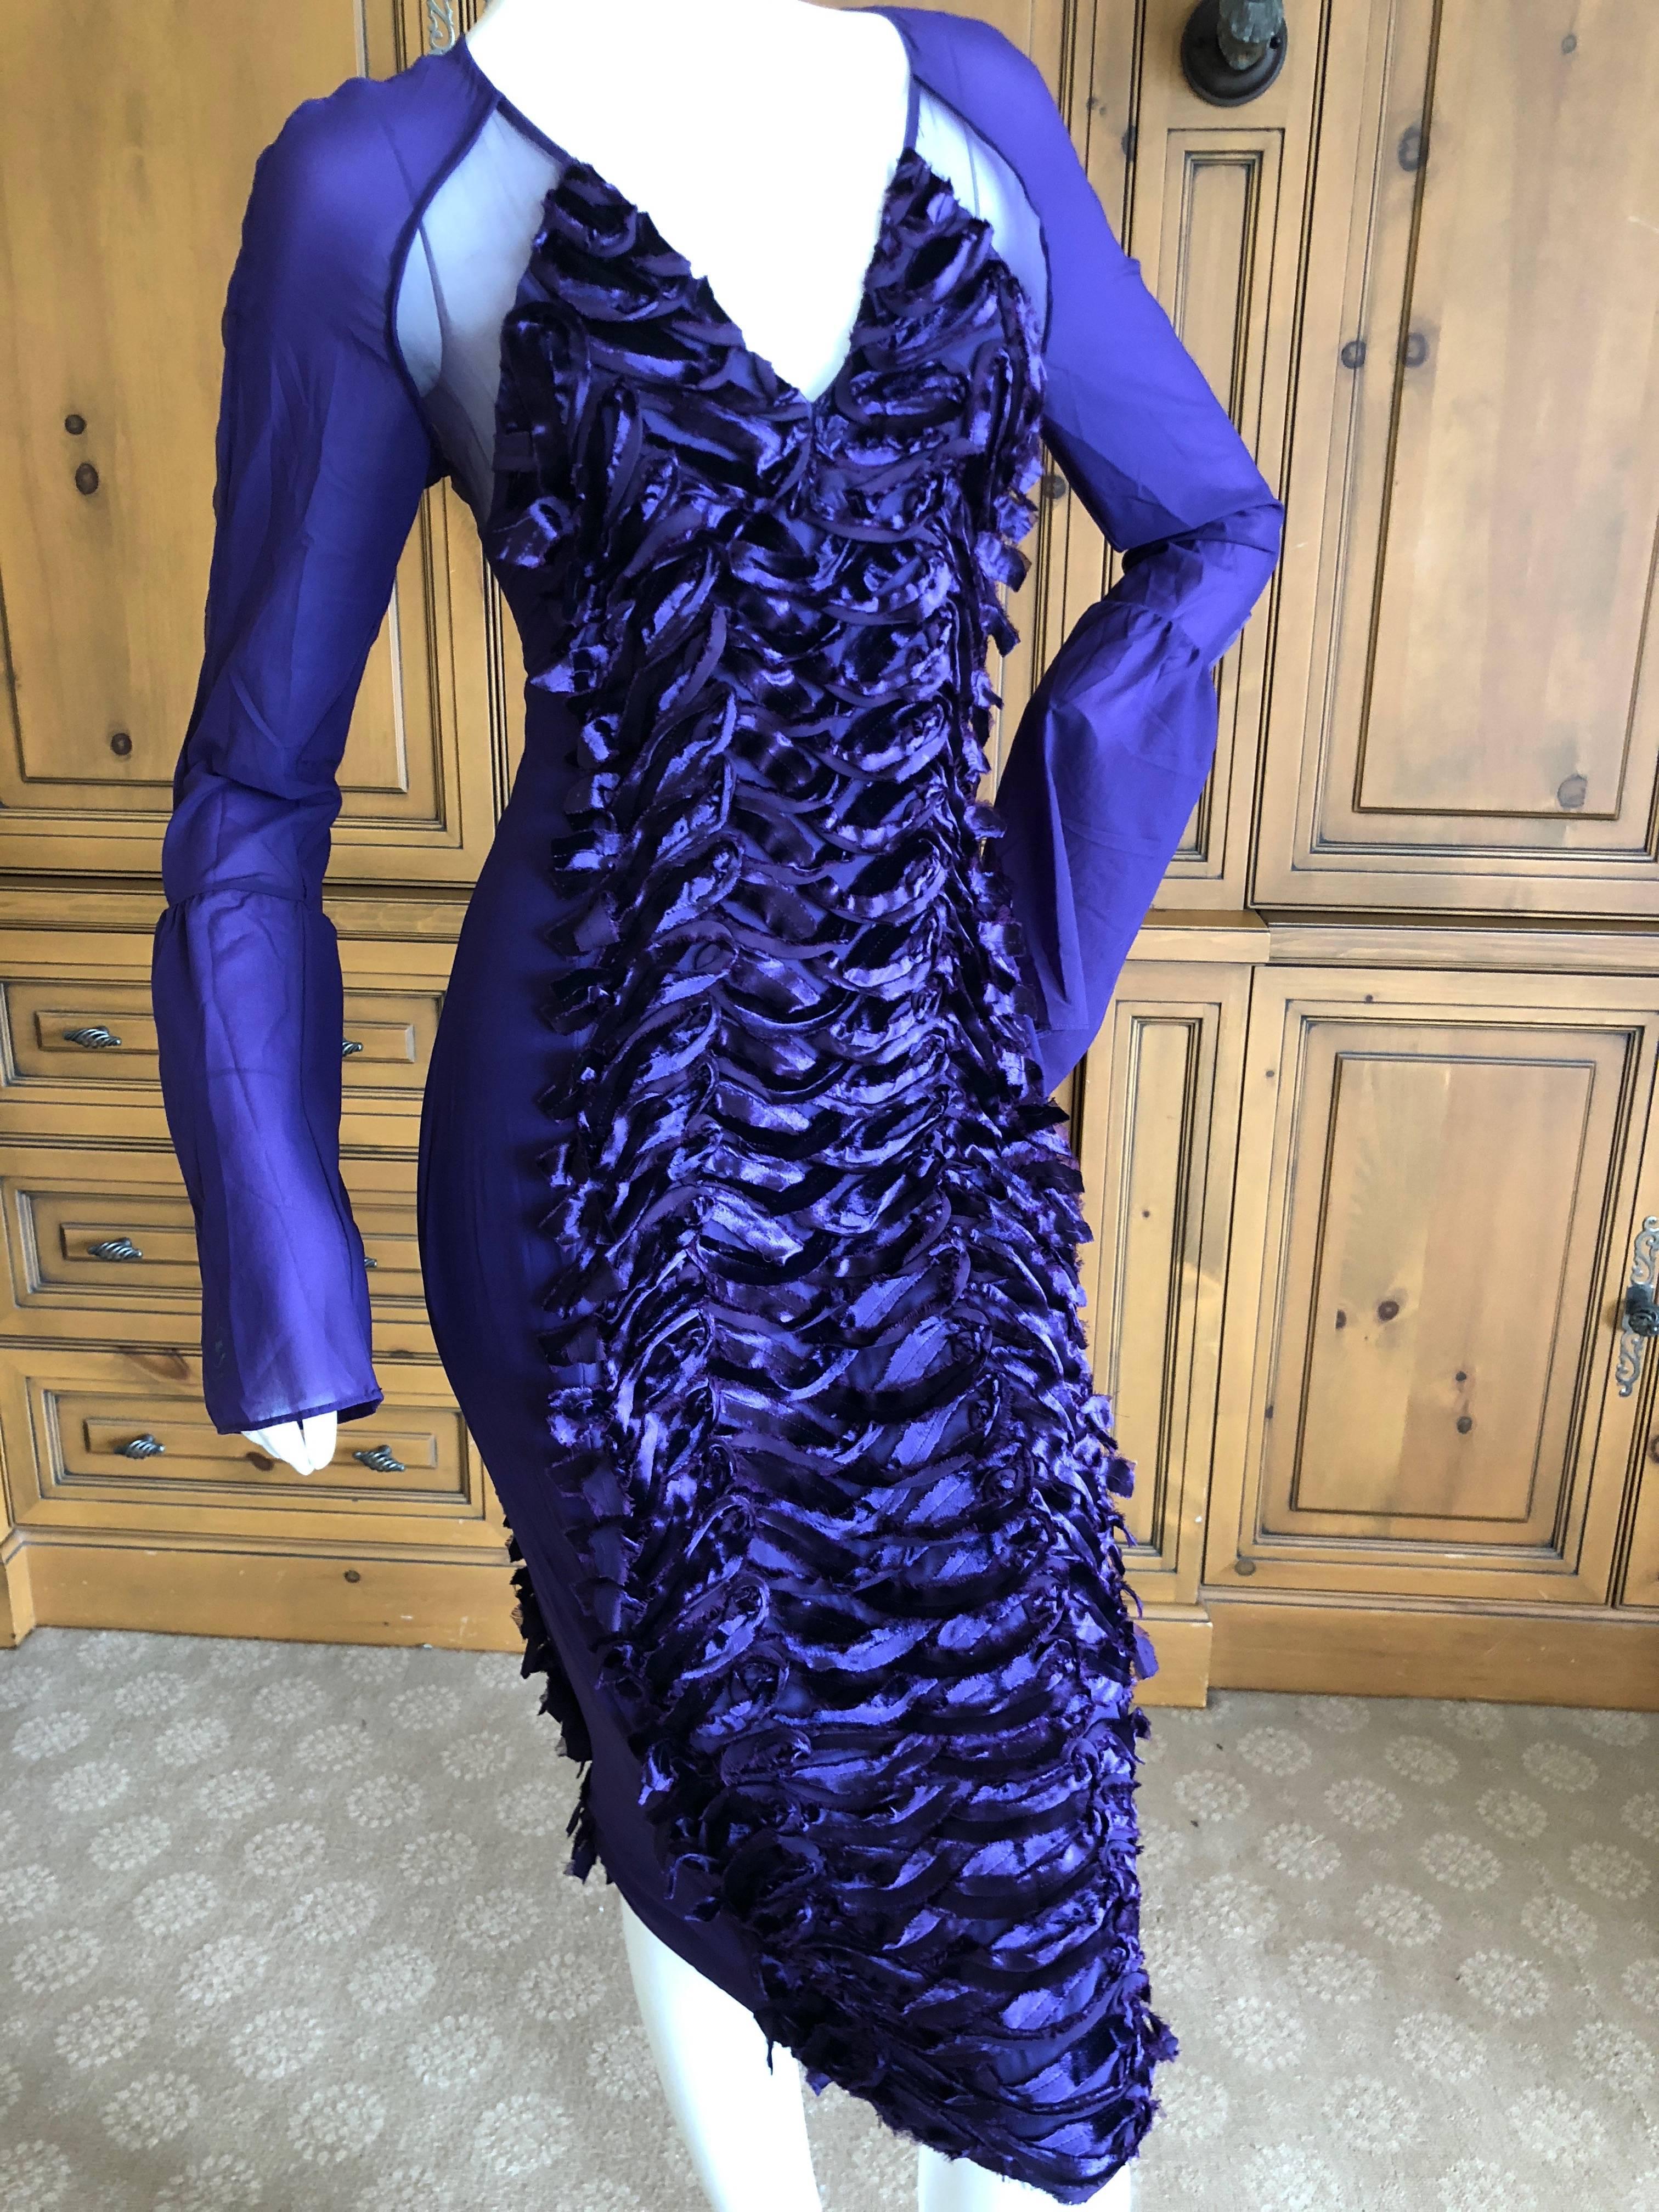 Gucci by Tom Ford Purple Velvet Trim Cocktail Dress In New Condition For Sale In Cloverdale, CA